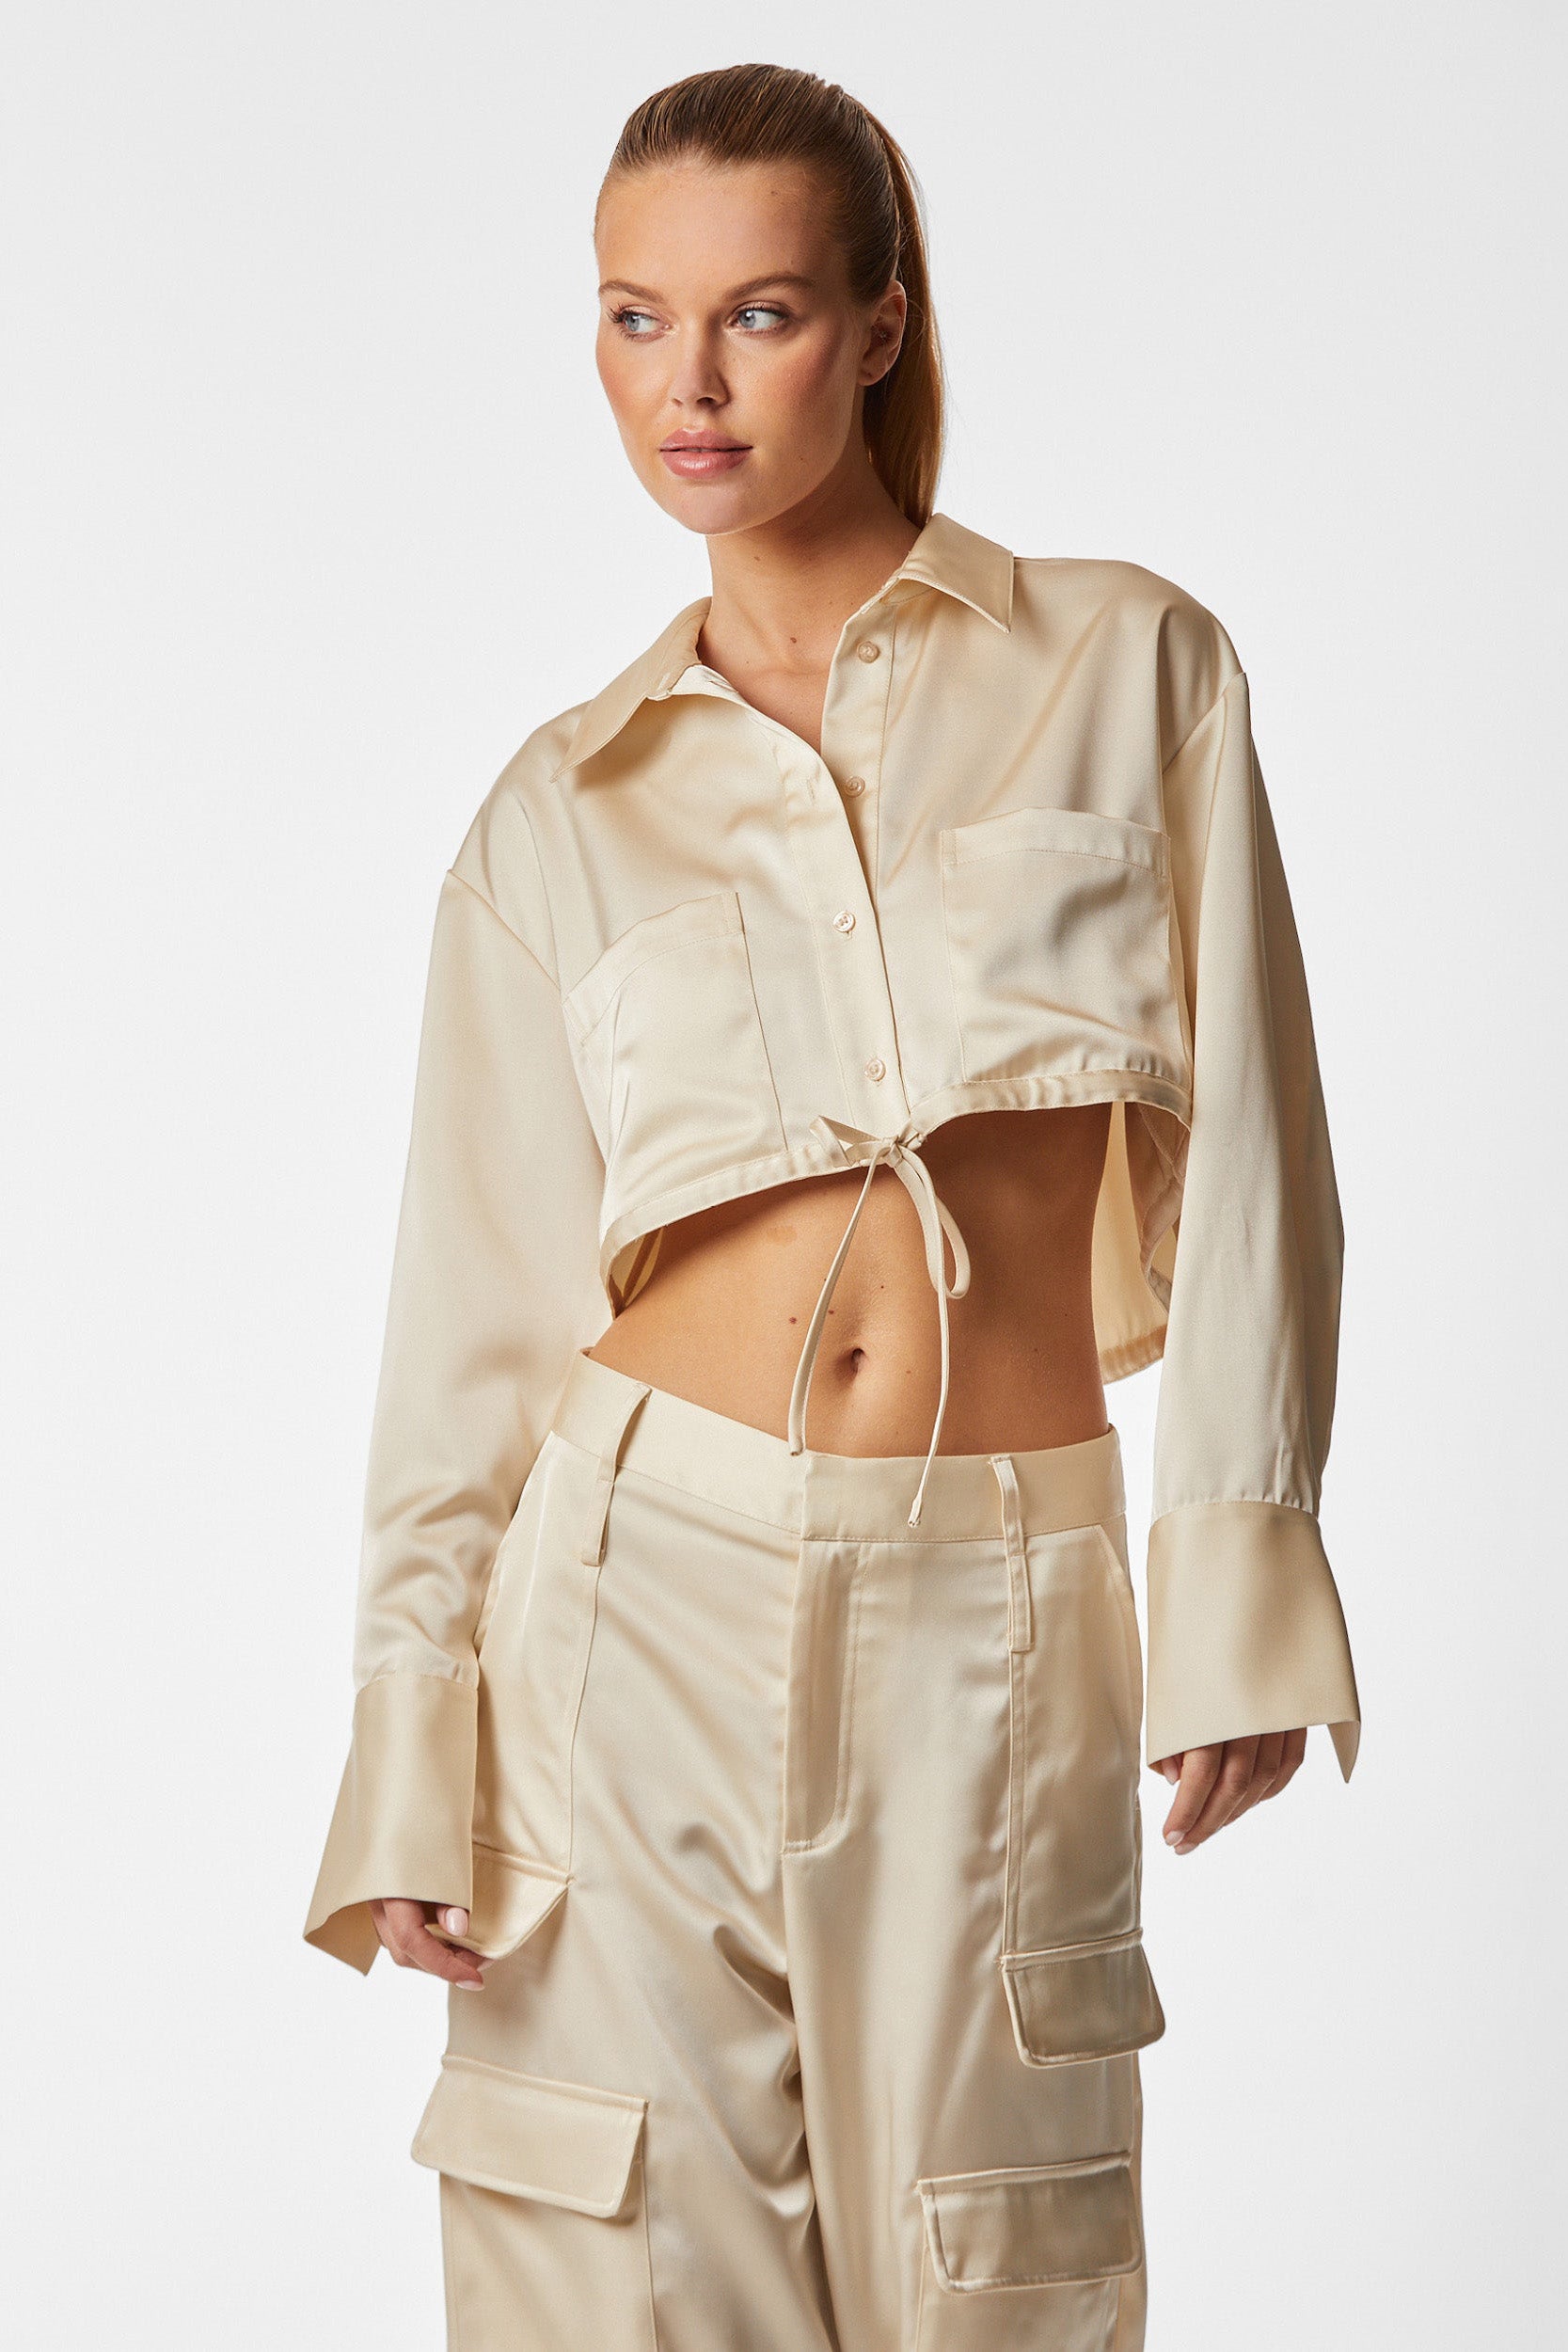 A woman is wearing a chic pearl-colored outfit featuring the Milan Satin Button Up - Pearl, a cropped satin shirt with an adjustable drawstring, complemented by matching high-waisted cargo pants adorned with intricate detailing. She has her hair tied back and poses against a plain white background, gazing slightly to the side.